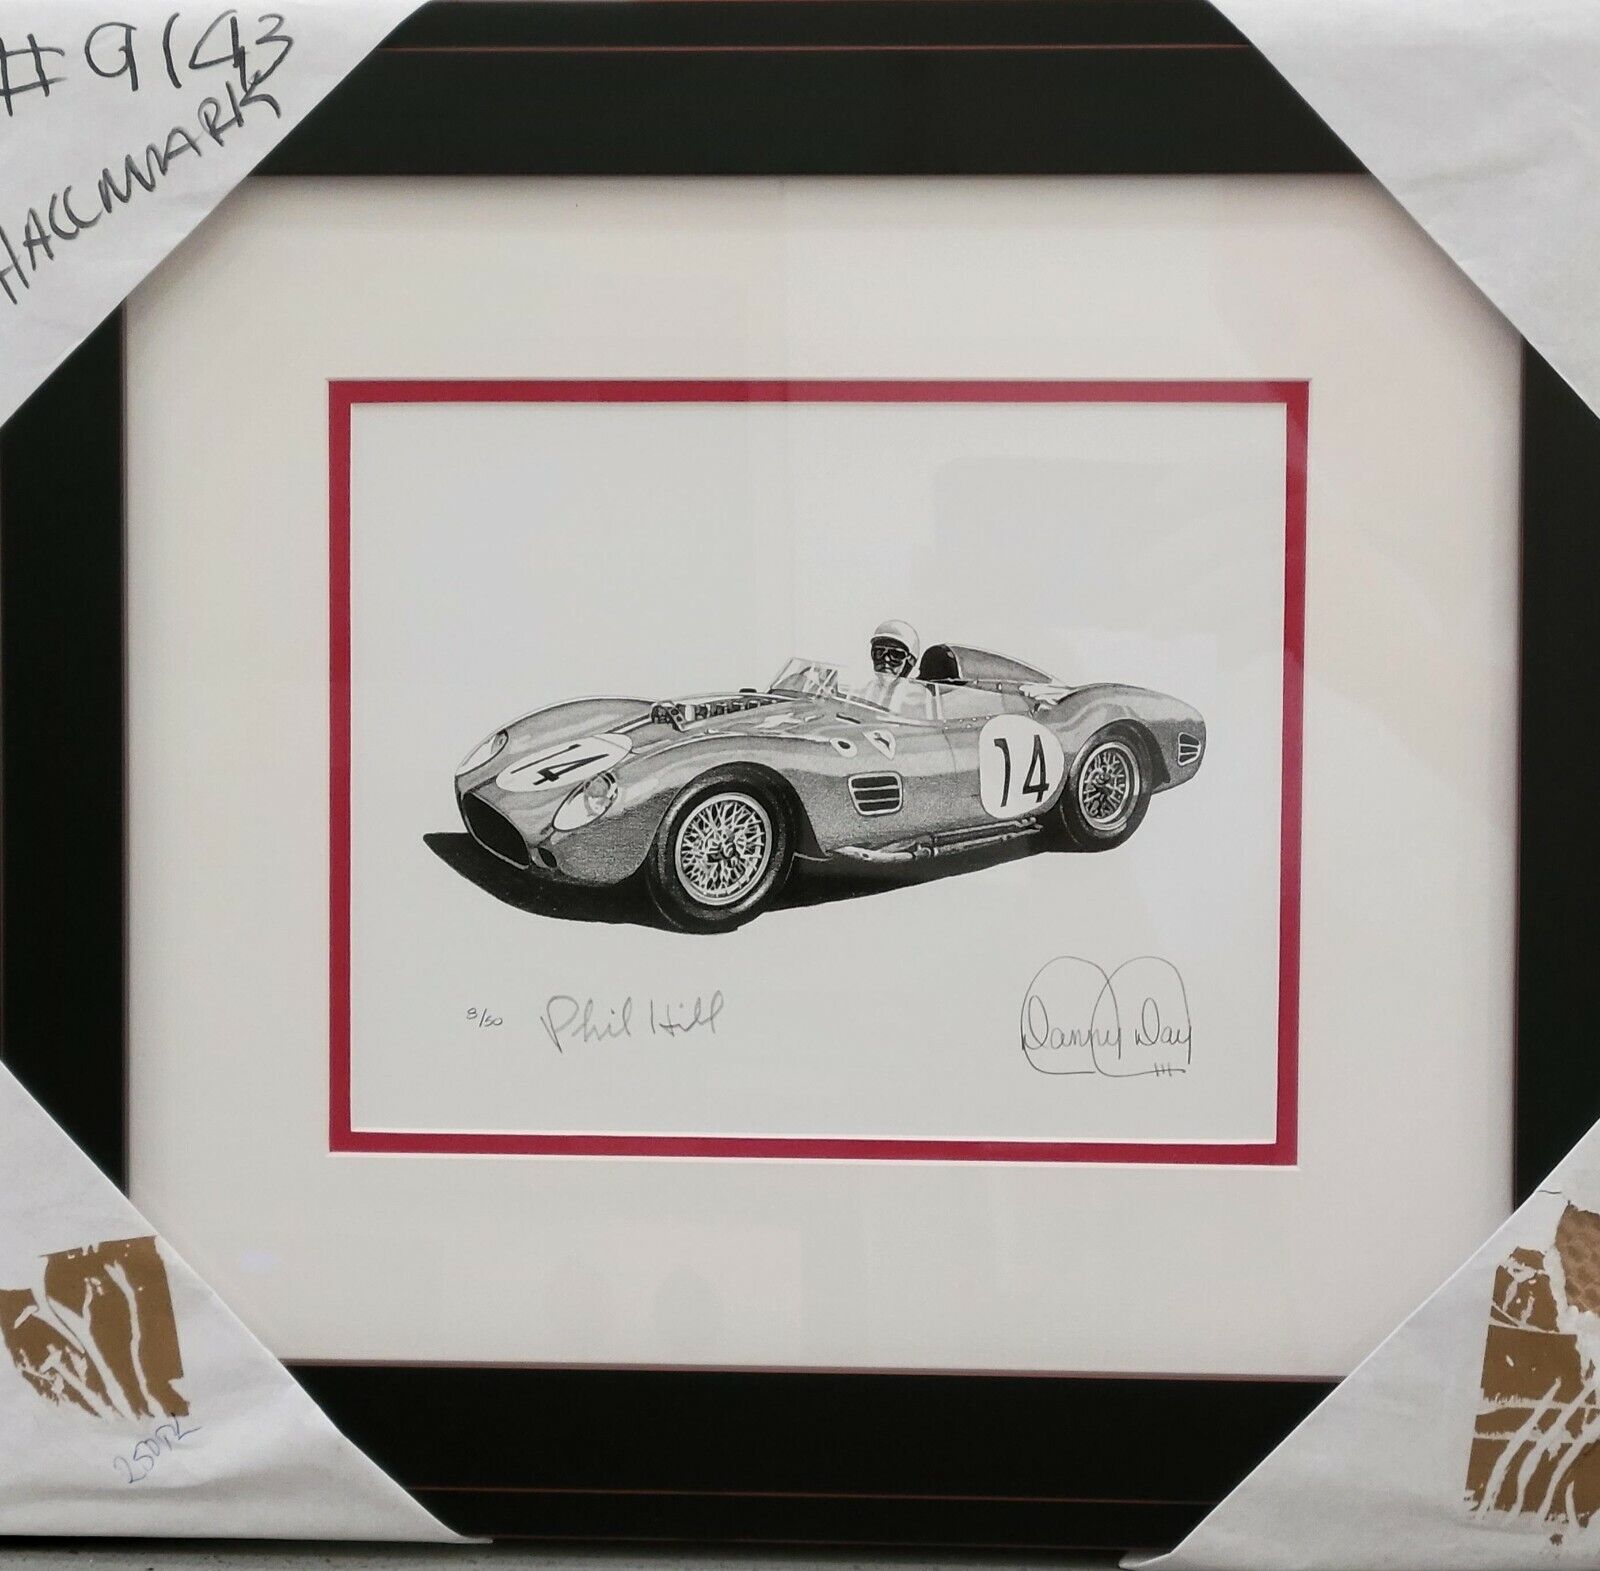 Ferrari 250 Testarossa Autographed by Phil Hill and the artist Danny Day